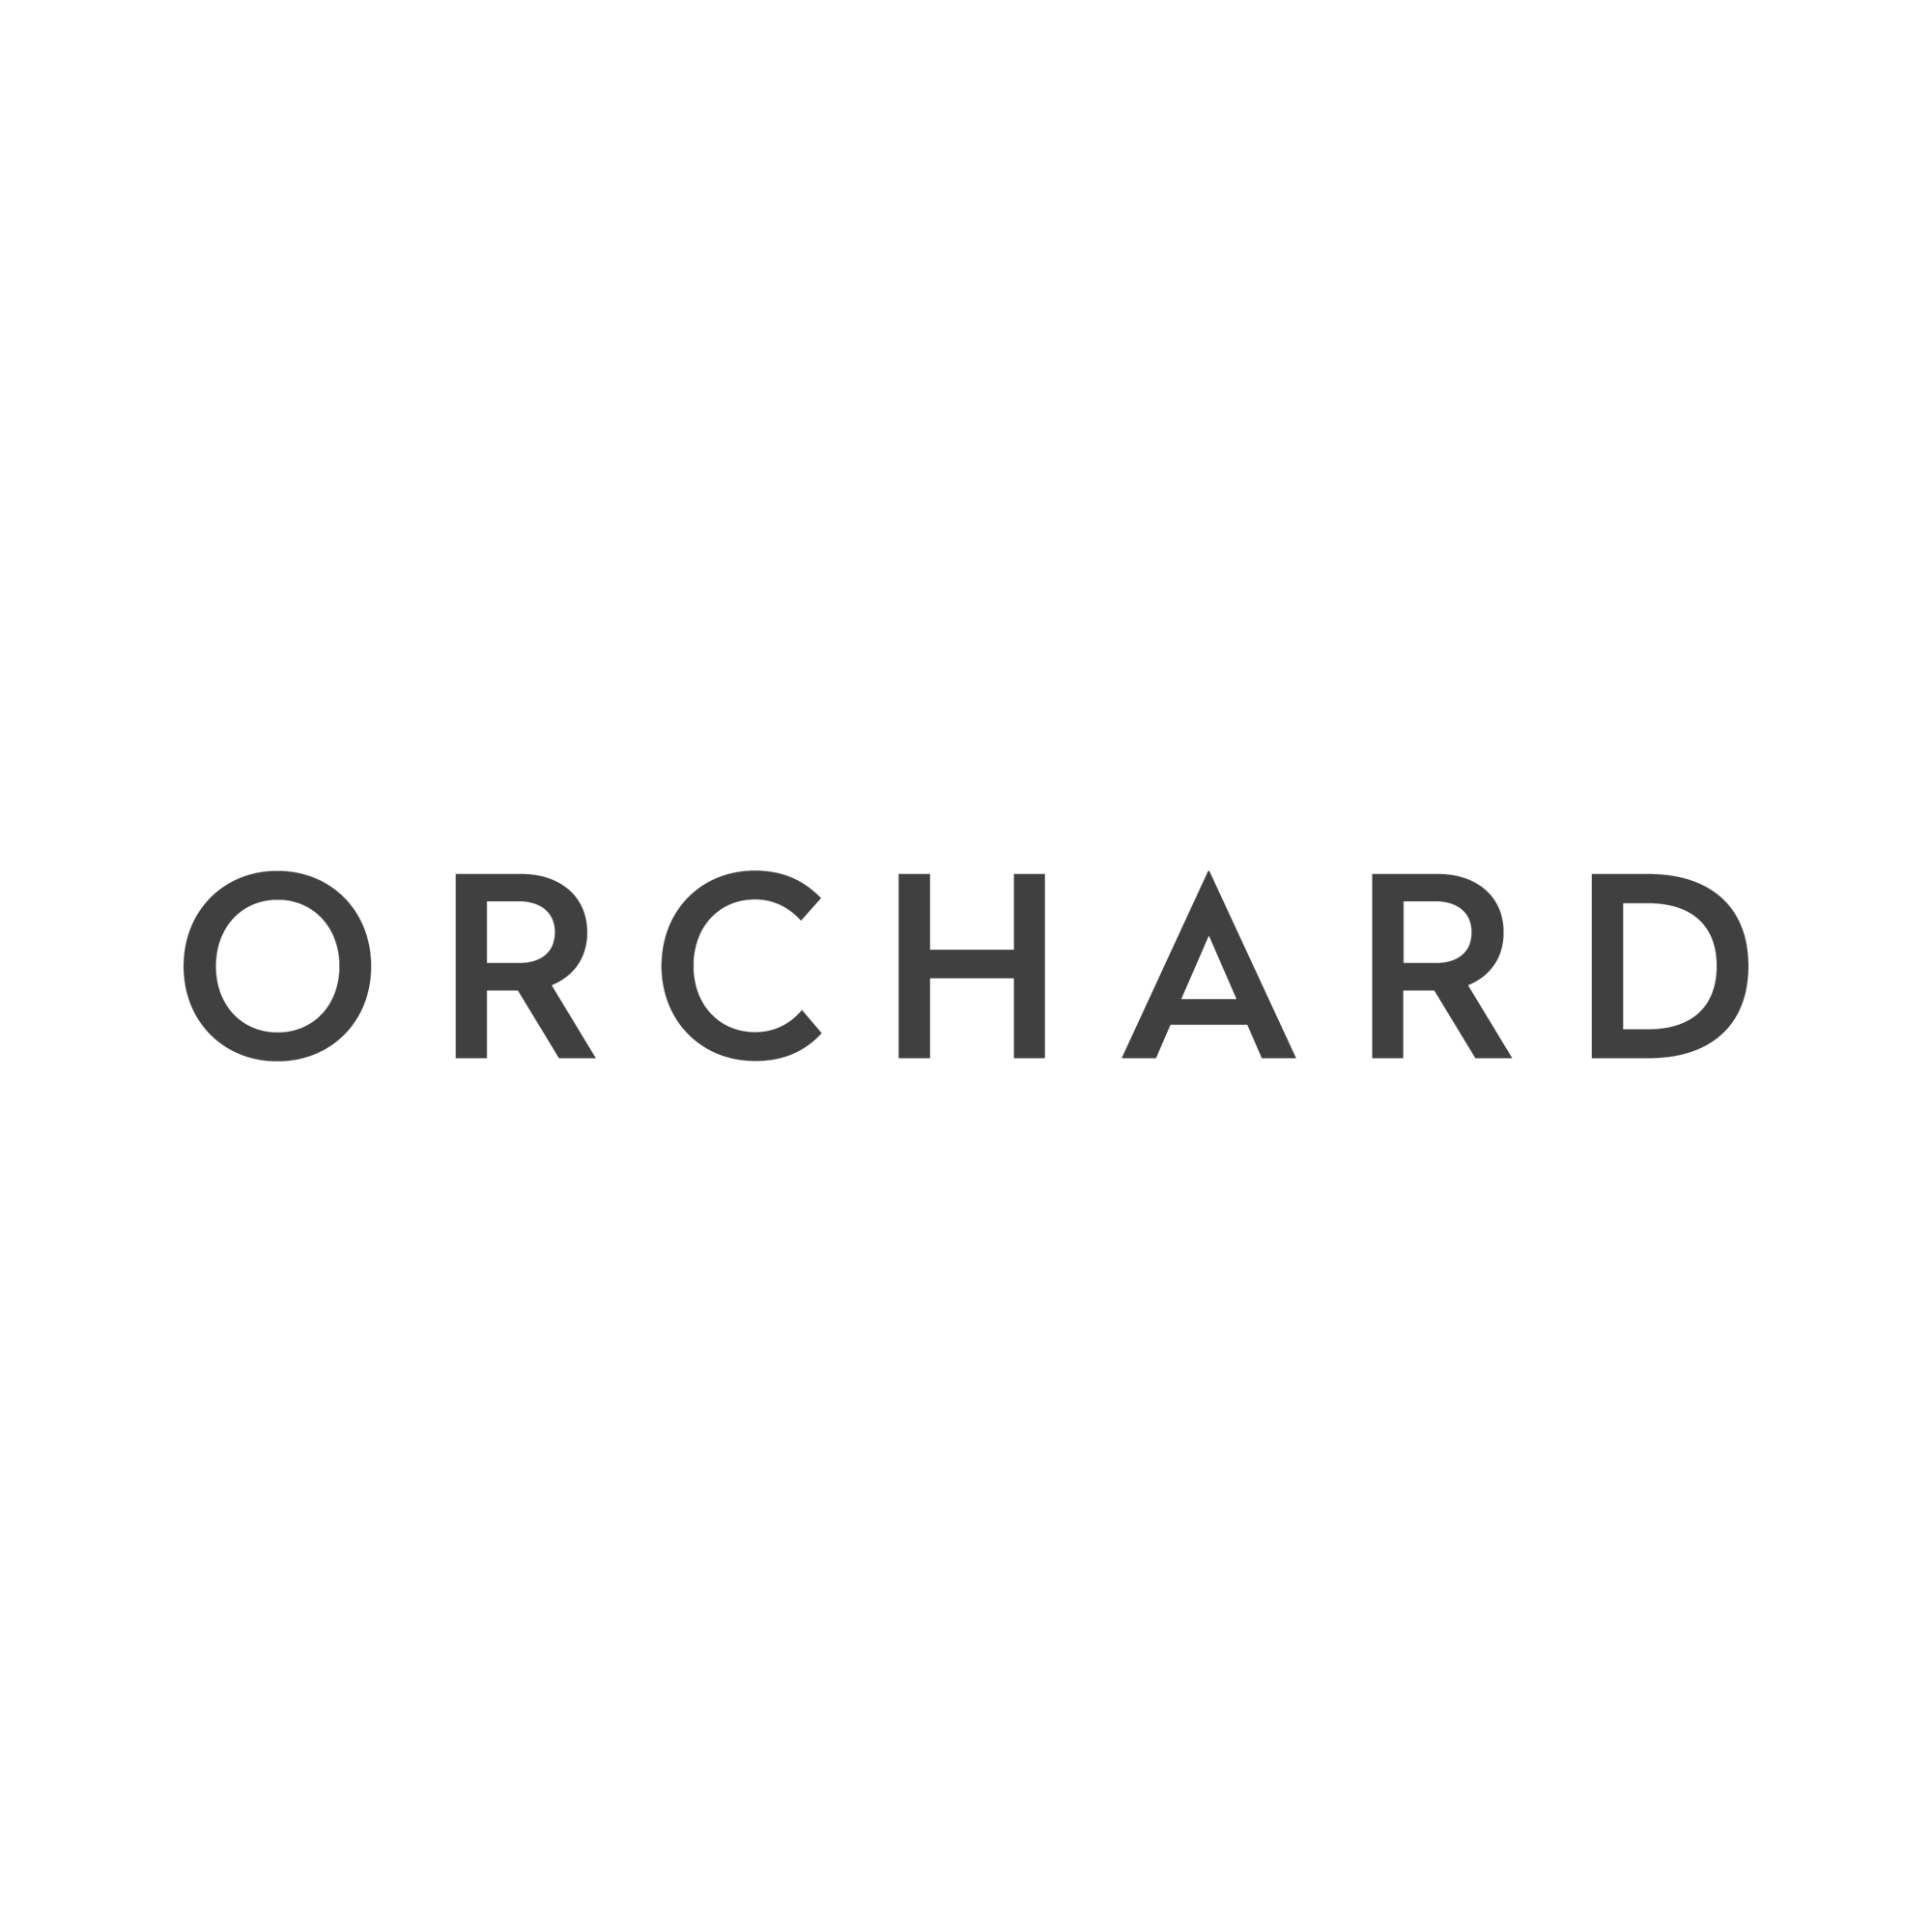 Orchard Systems